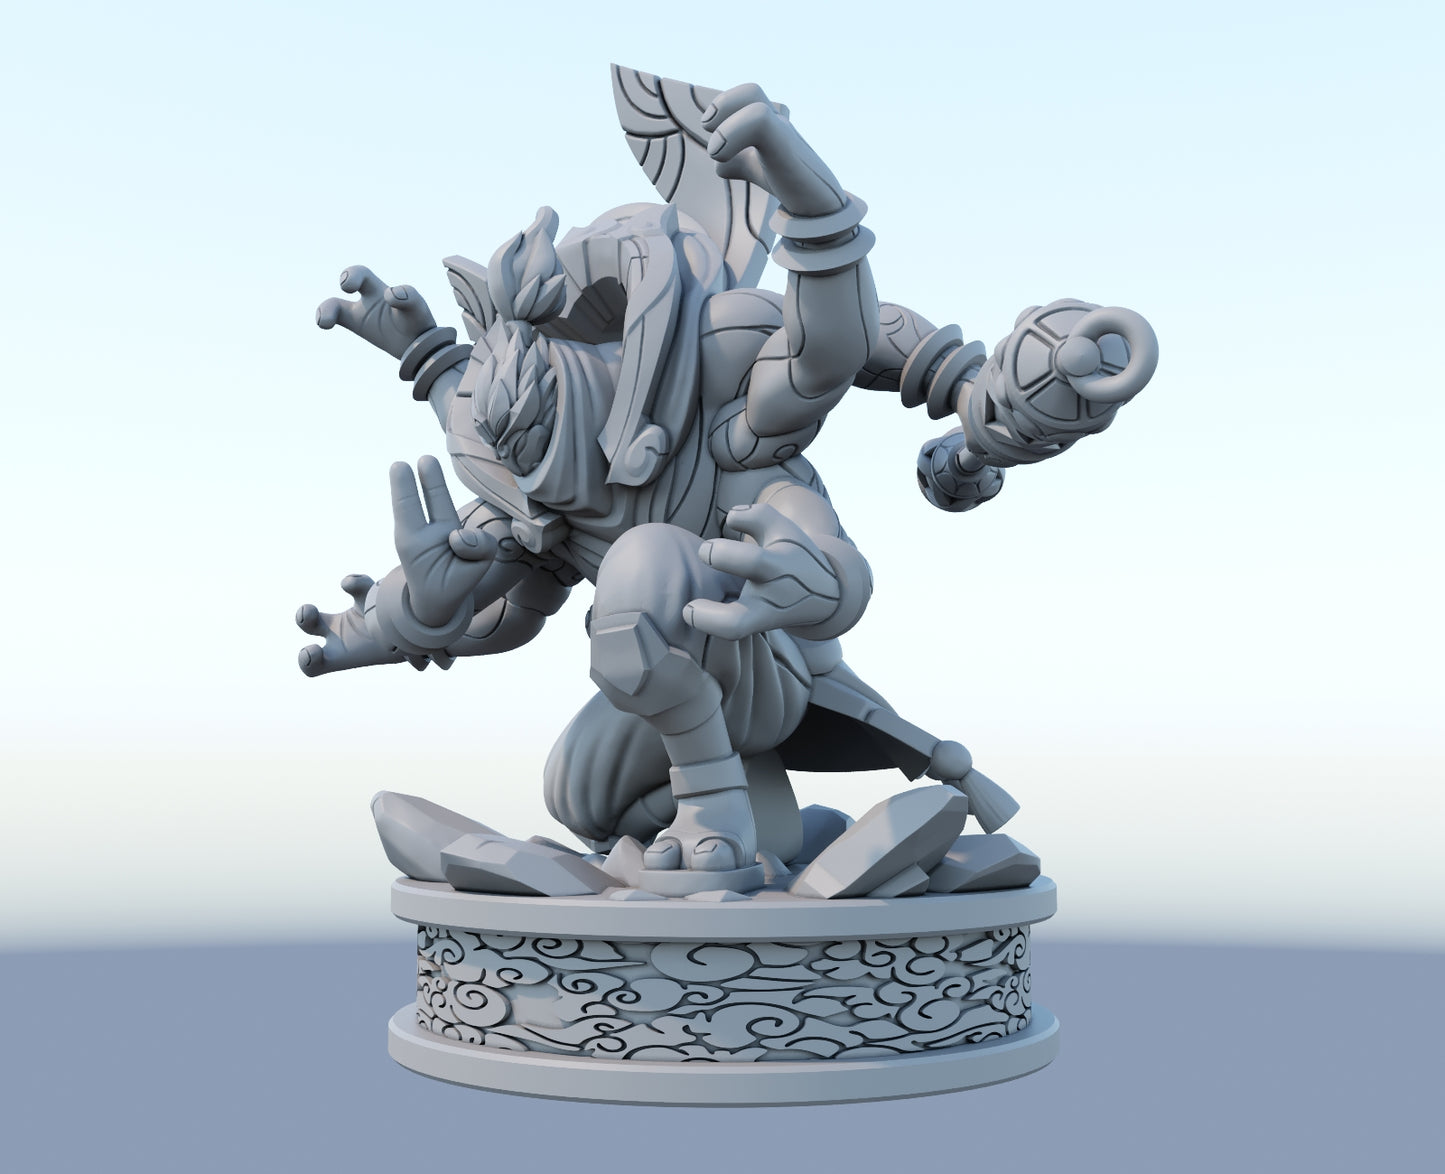 God staff Jax 3D-printed League of Legends champion figure. Decorate your gaming setup or home with your favorite League of Legends champion! Choose between the unpainted version, perfect for you to paint yourself, or the hand-painted version by a professional painter. Order your figure today!